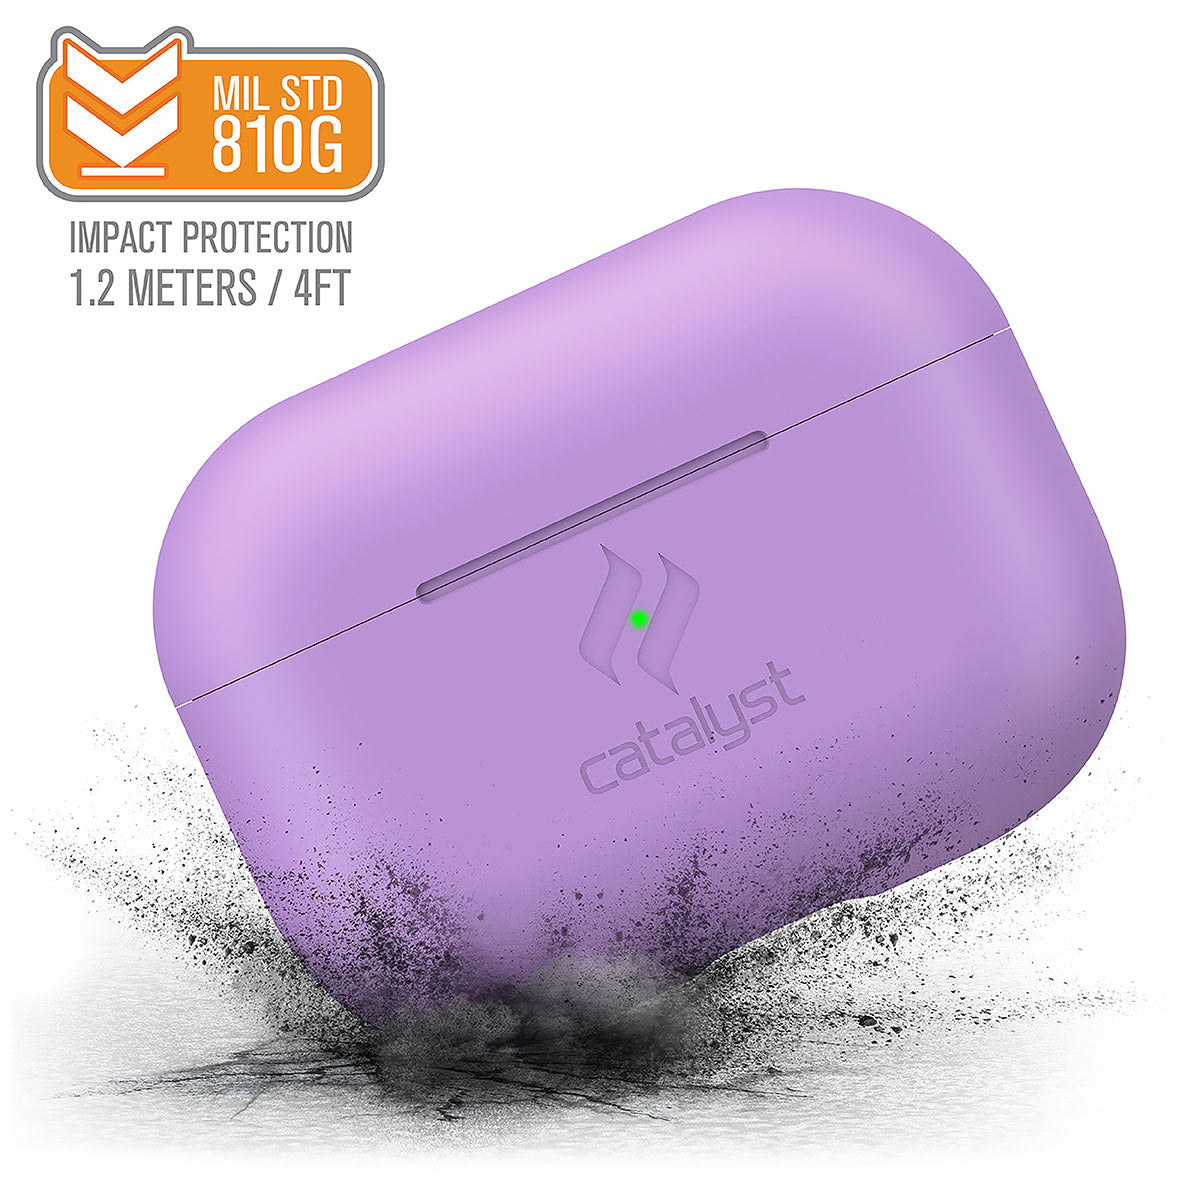 Catalyst airpods pro gen 2/1 slim case showing how drop proof the case is in lilac colorway text reads MIL STD 810G impact protection 1.2 meters/4FT